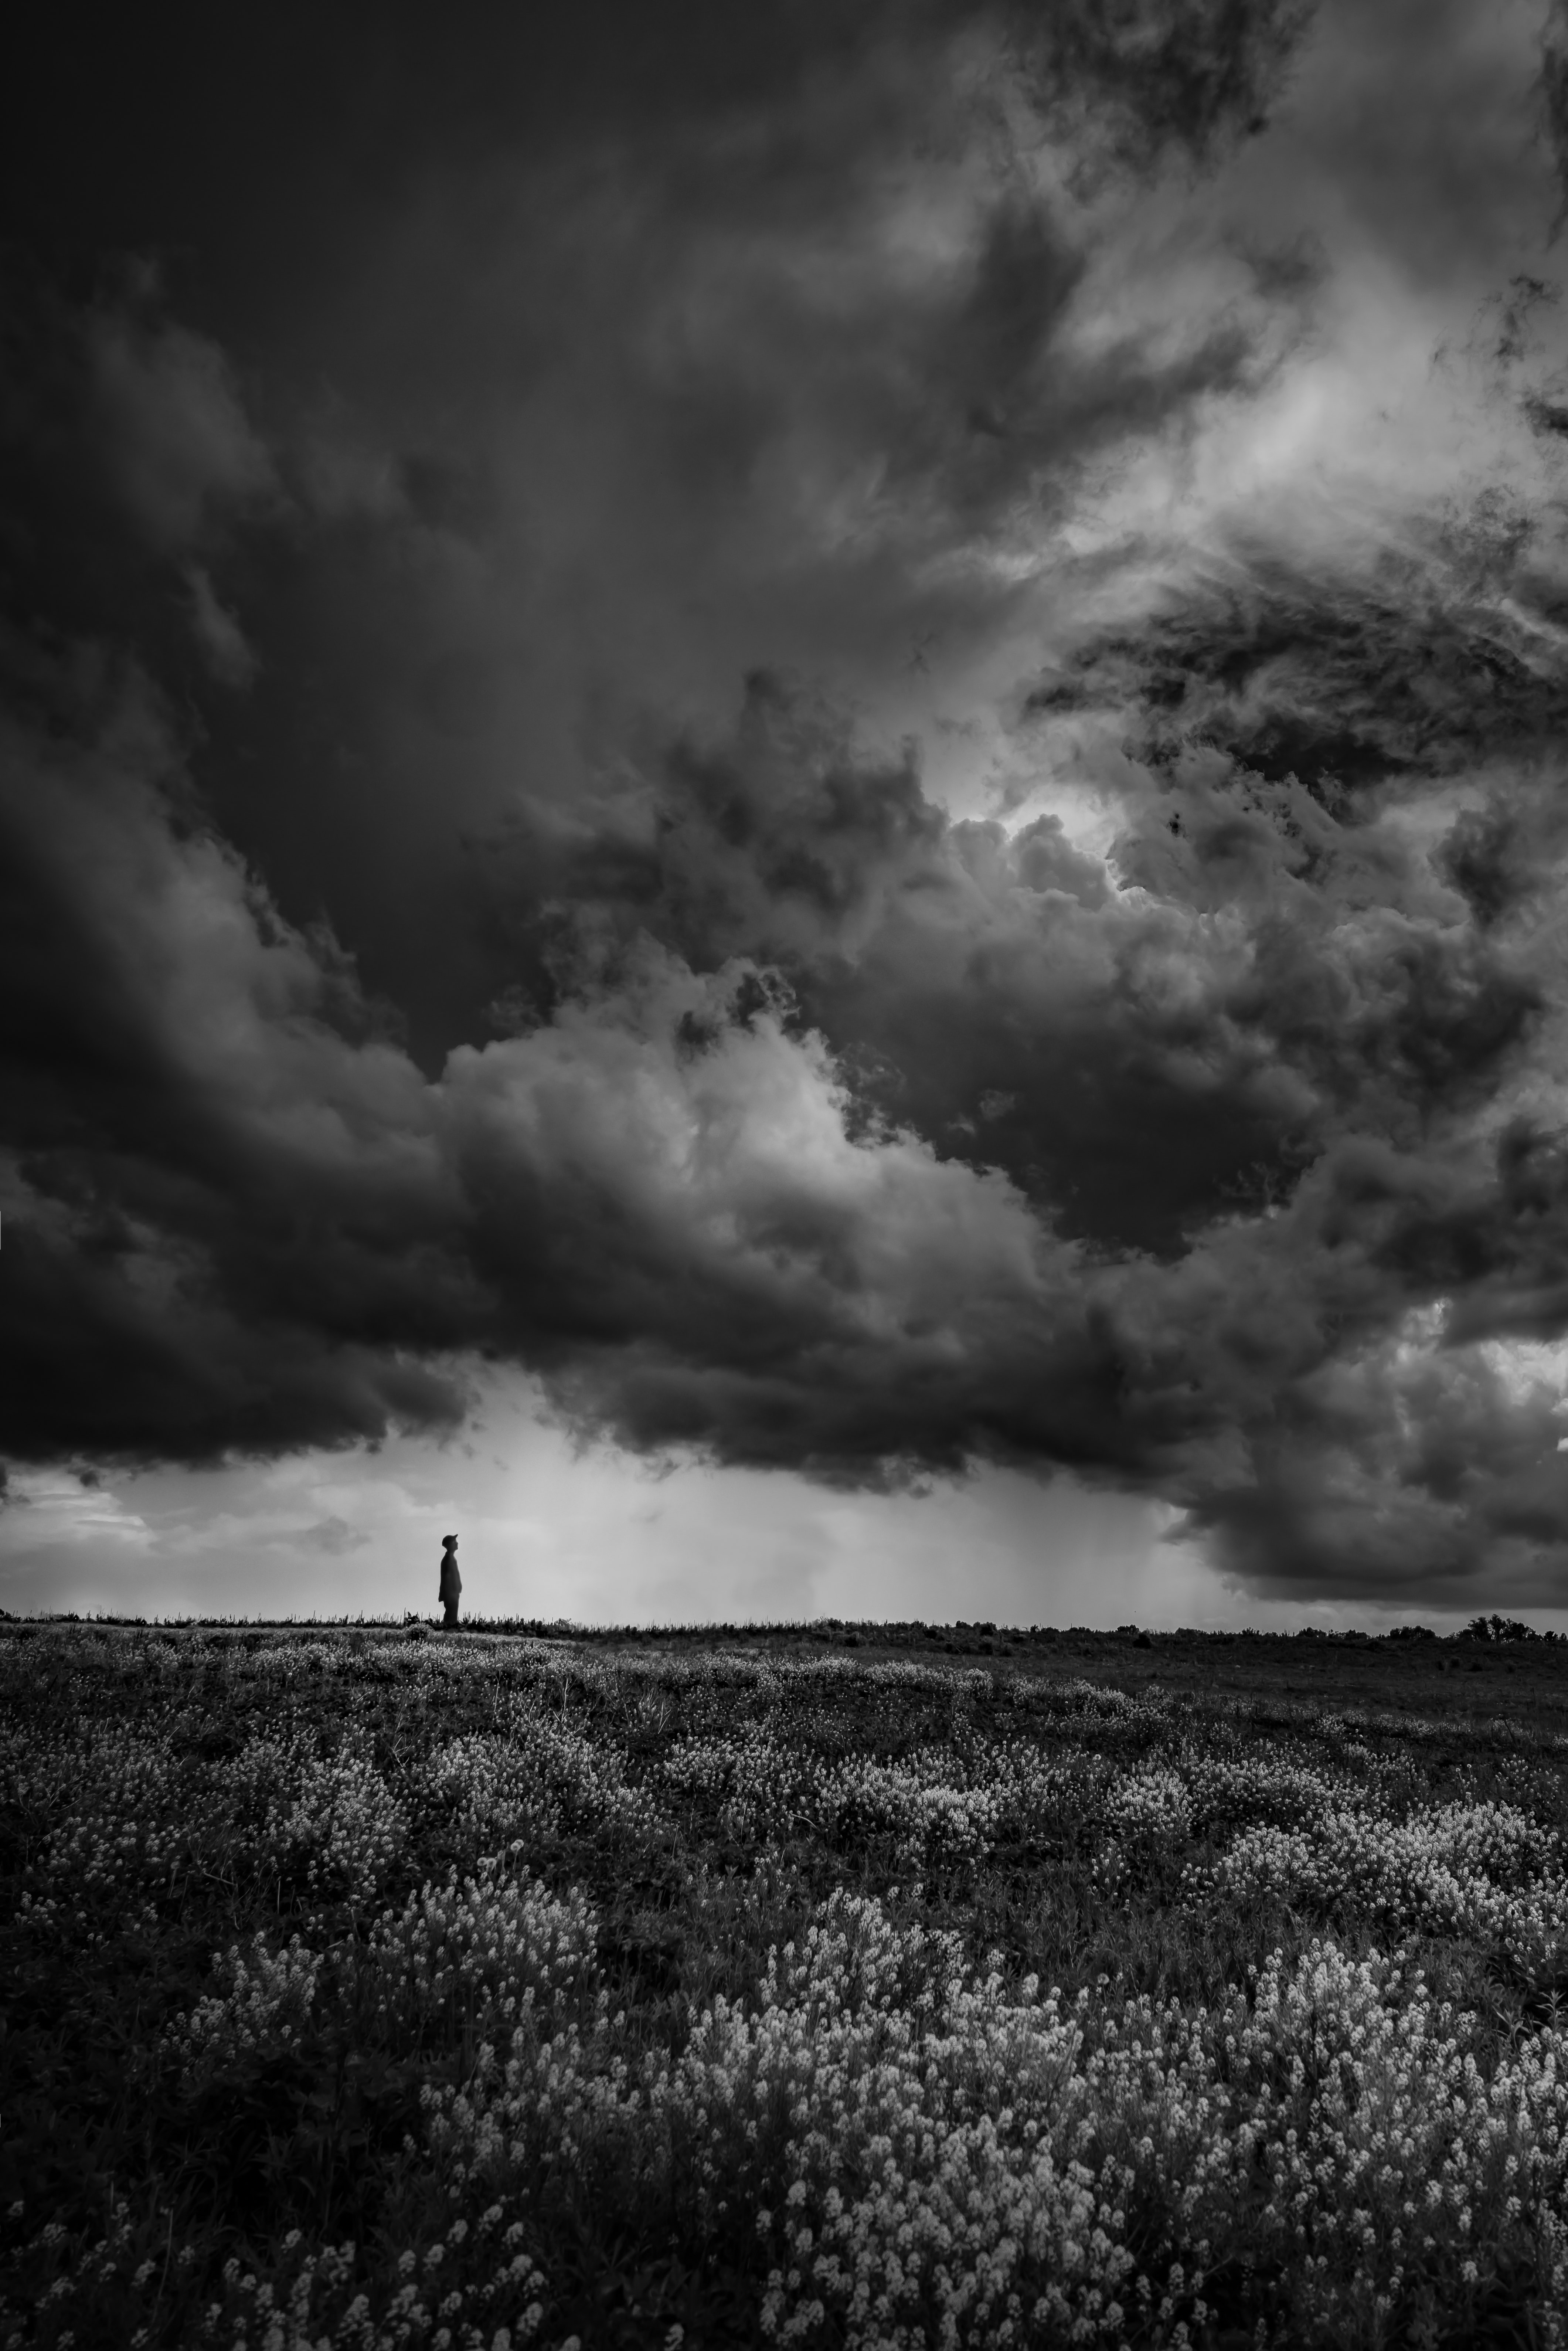 bw, sad, scope, spaciousness download for free